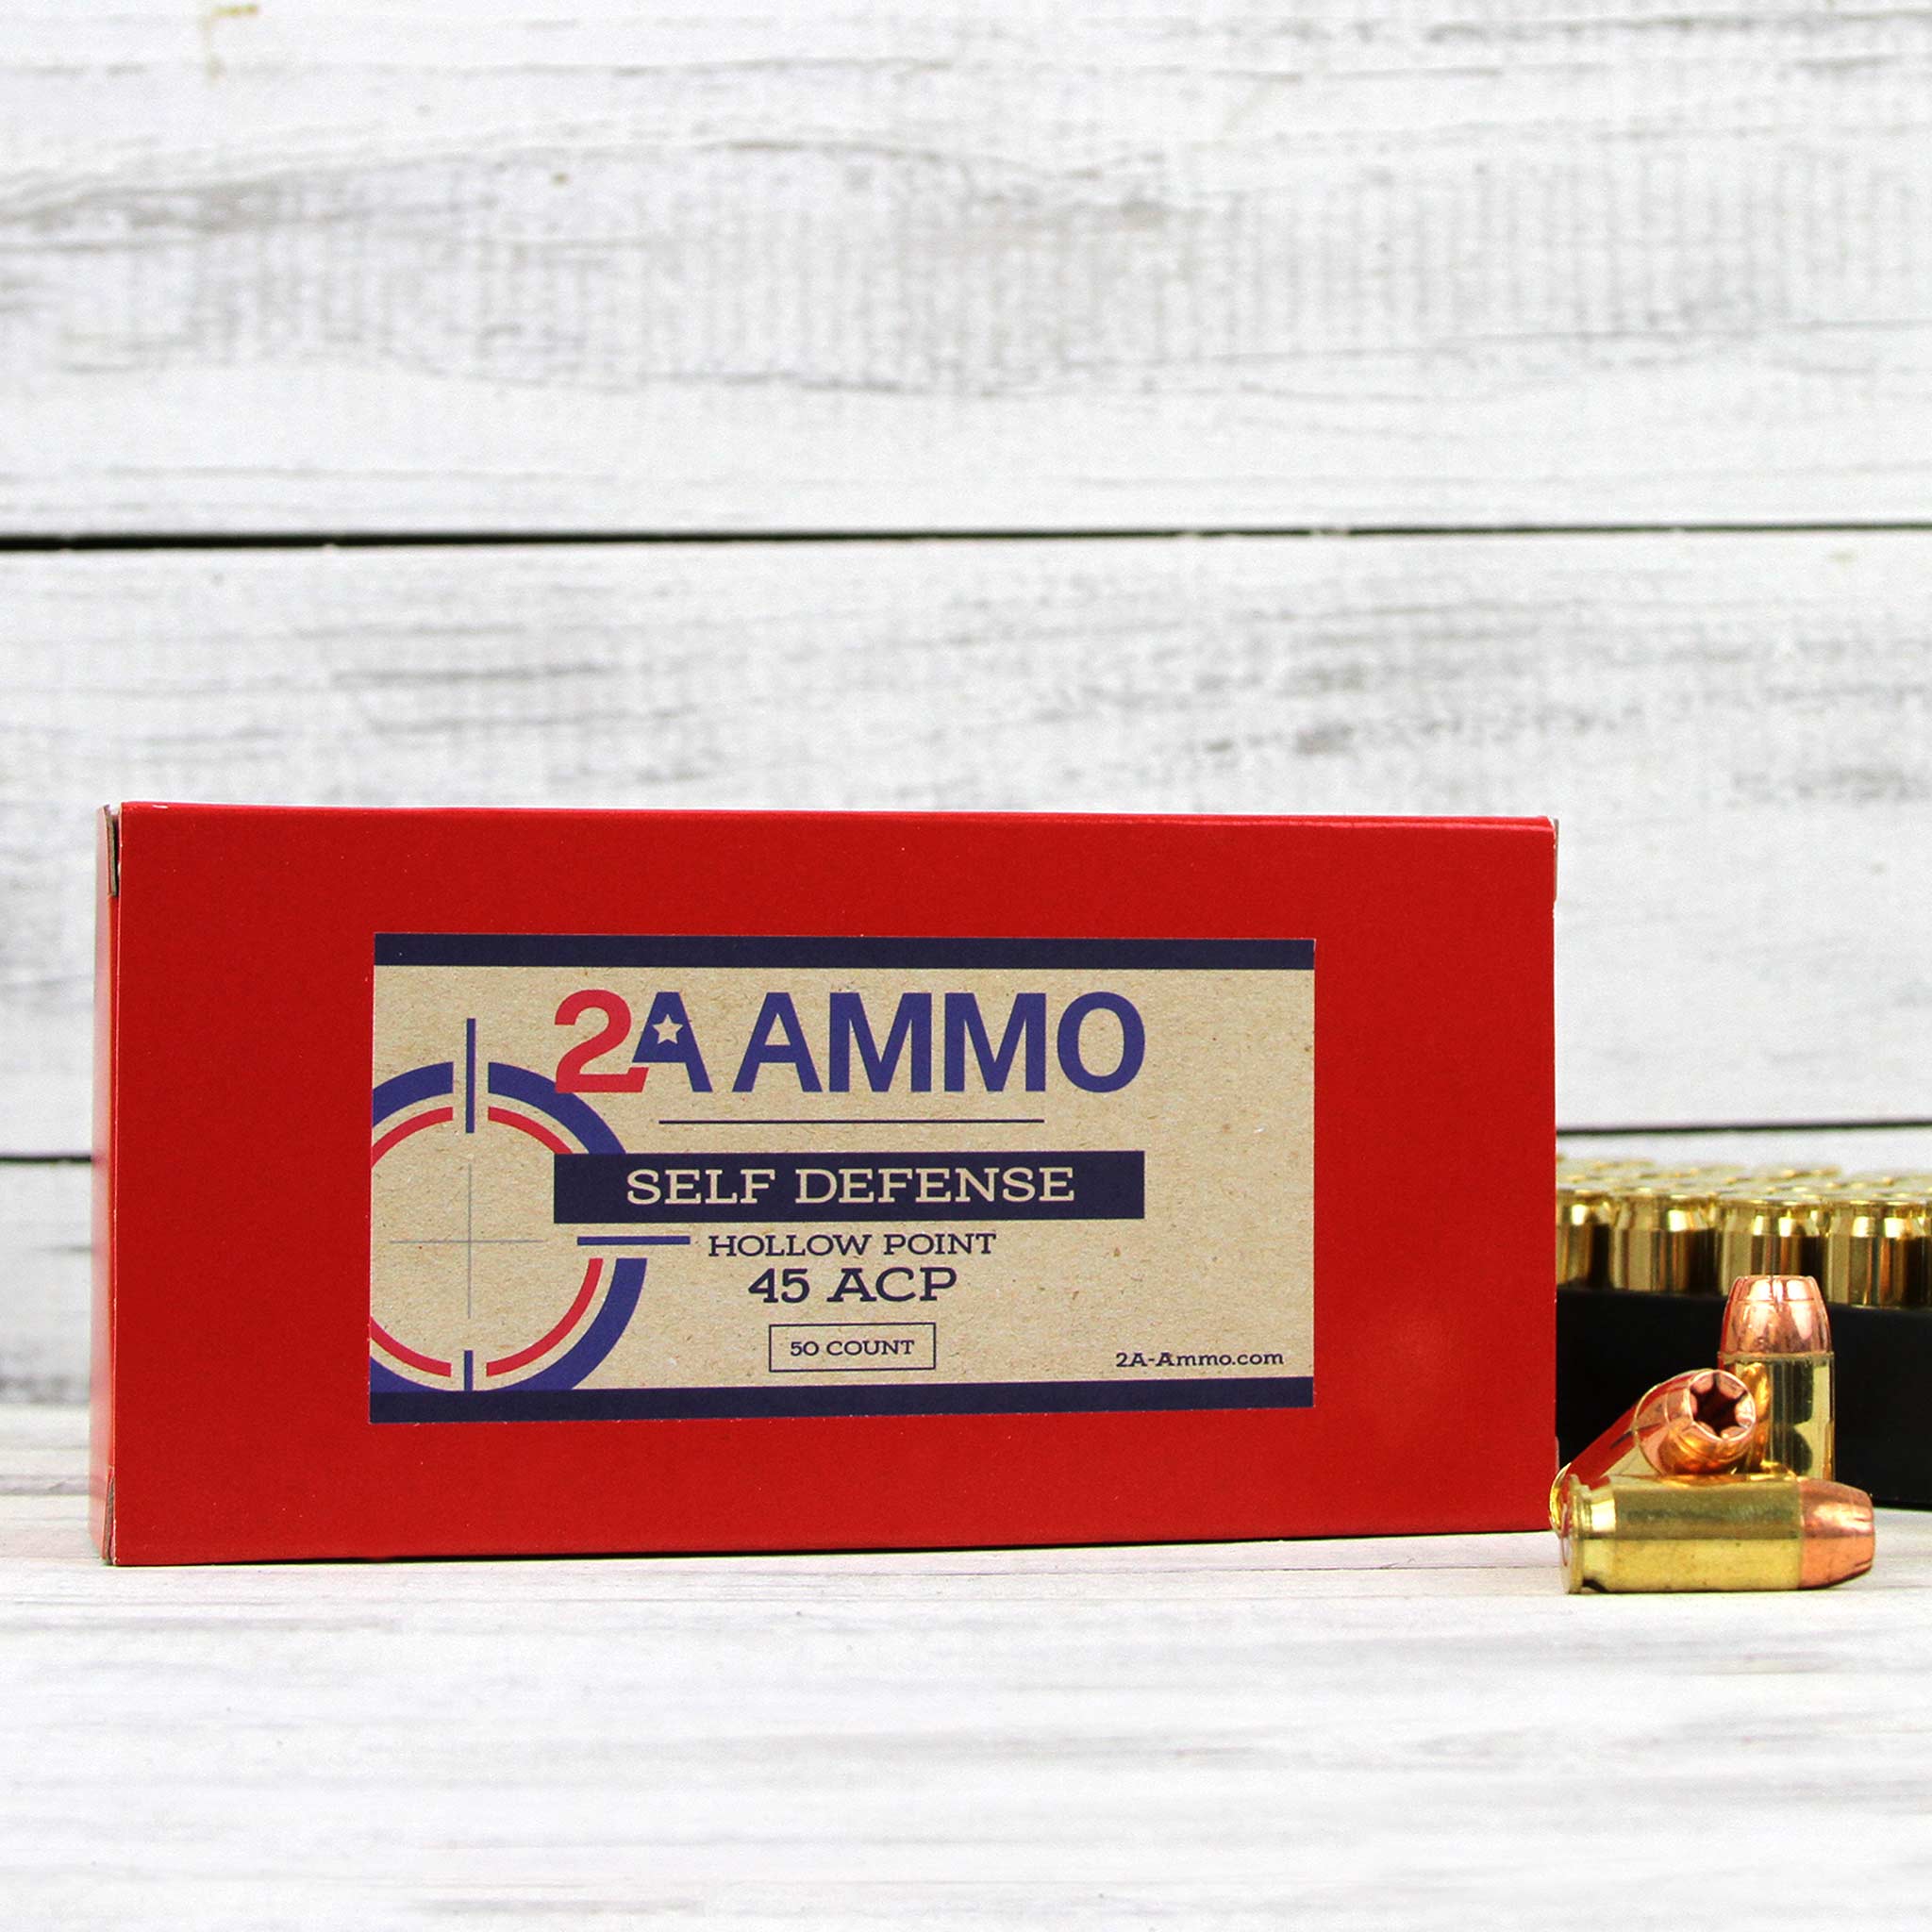 45 ACP Hollow Point Ammo for Self Defense